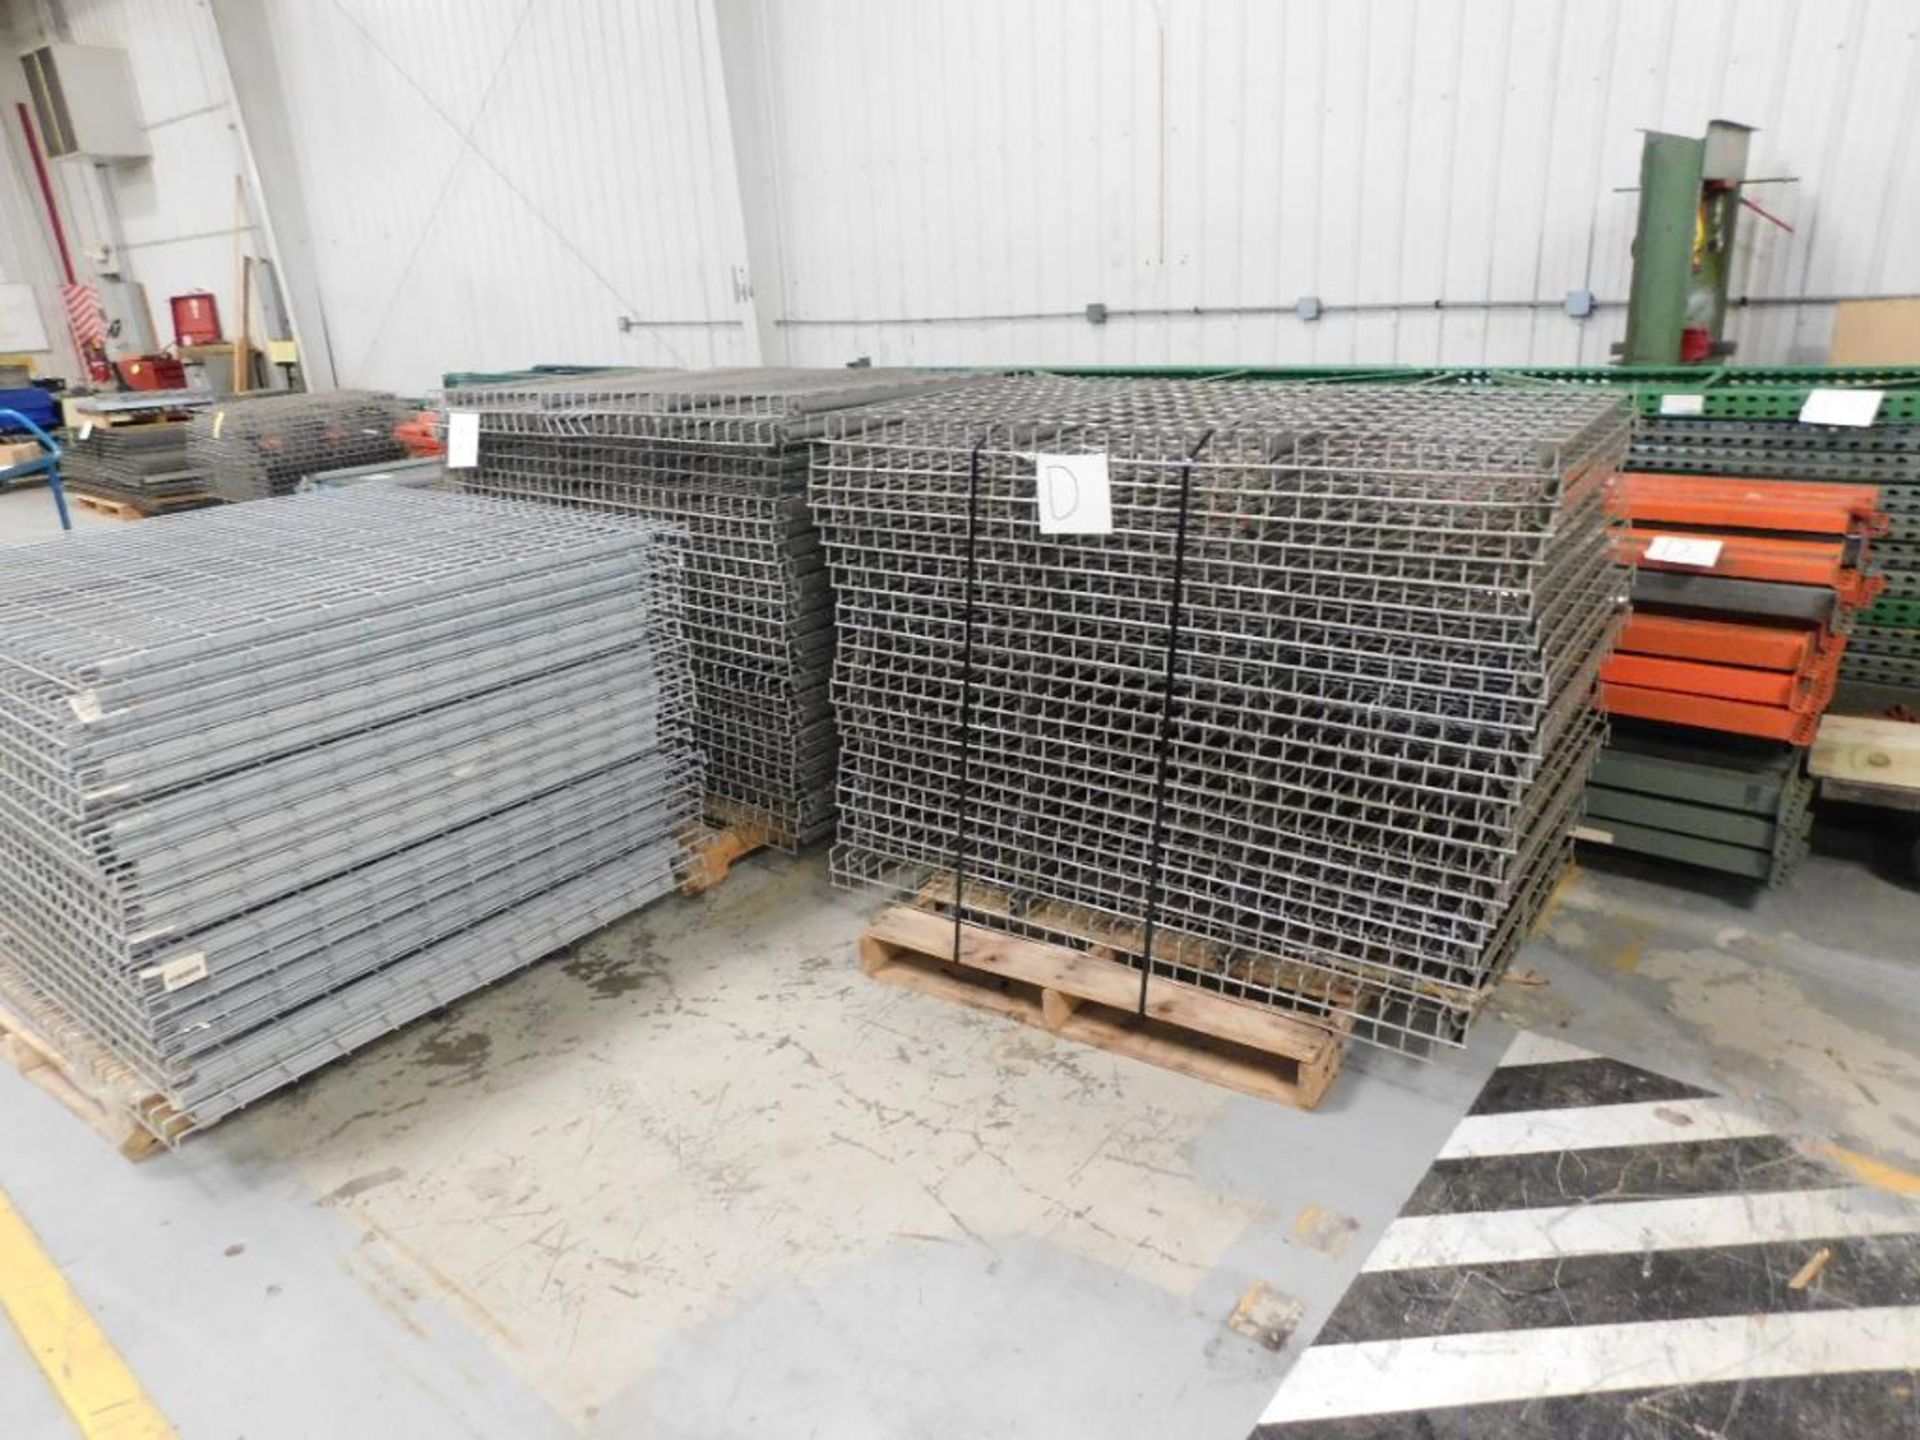 LOT: Pallet Rack, (12) 14' Uprights, (50) 10' Crossbars, Wire Decking, 36" Deep - Image 3 of 3